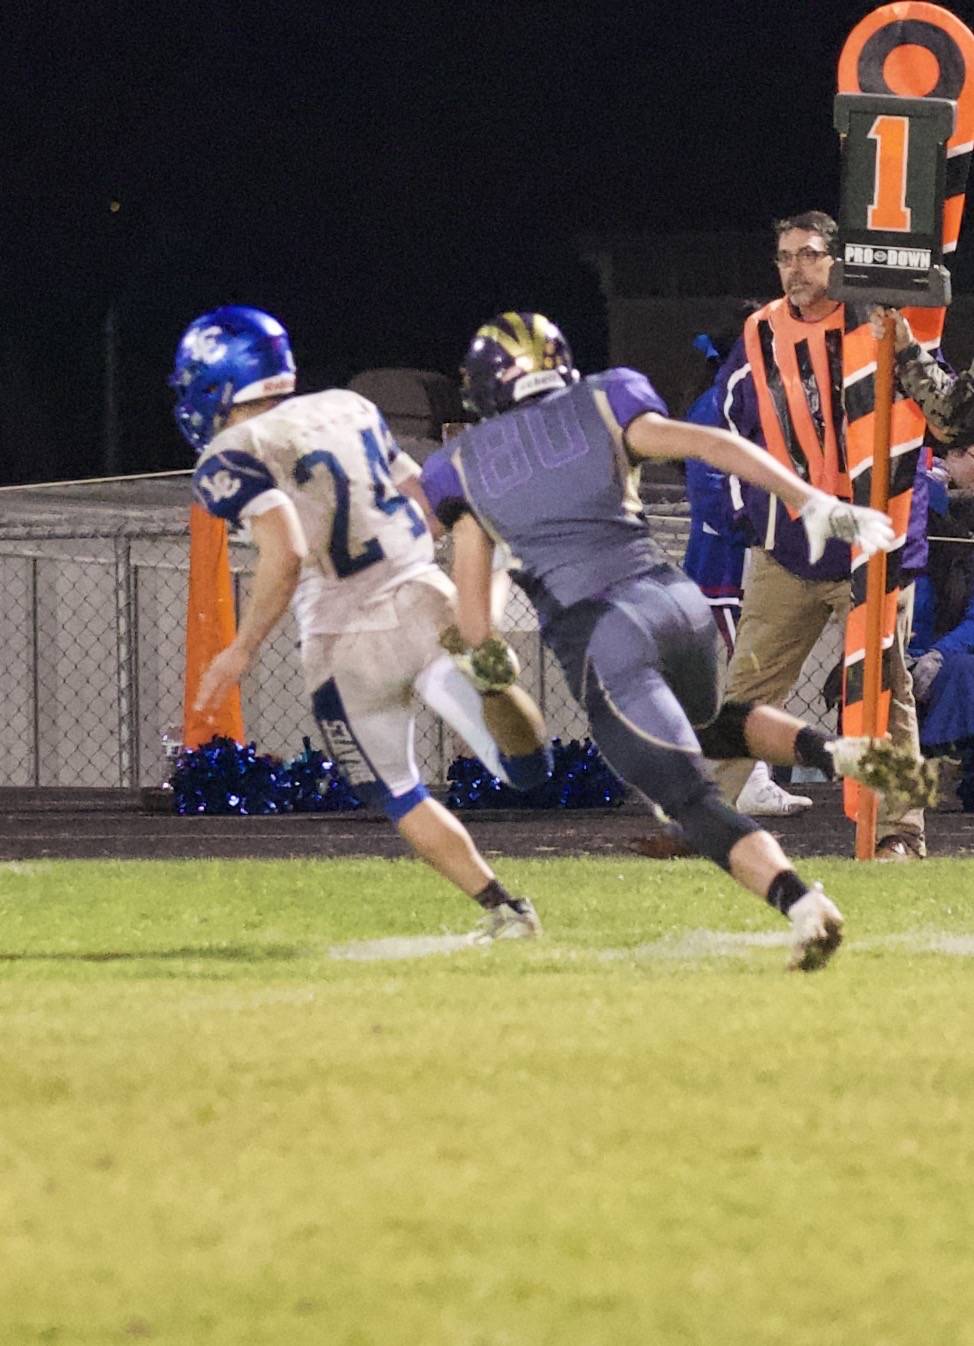 Max Field, No. 80, chases down the Braves ball carrier. (John Stimpson/Contributed photo.)